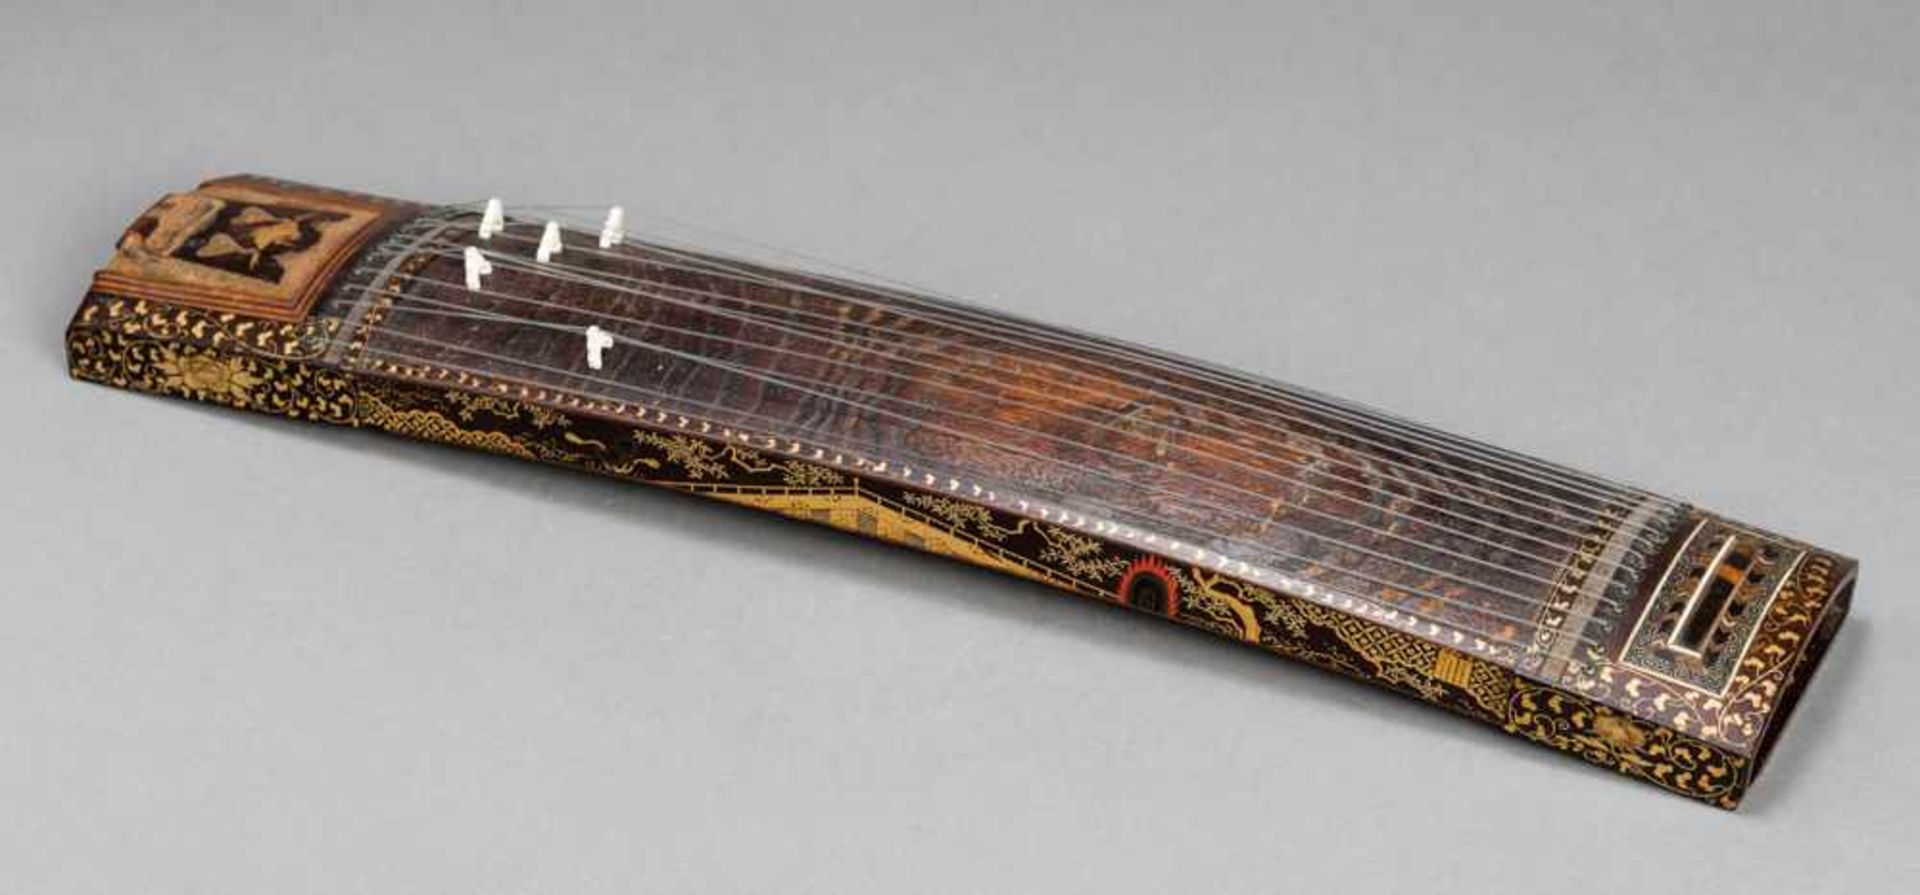 A FINE LACQUERED KOTO Wood, lacquer and bone. Japan, 19th centuryA traditional thirteen-string